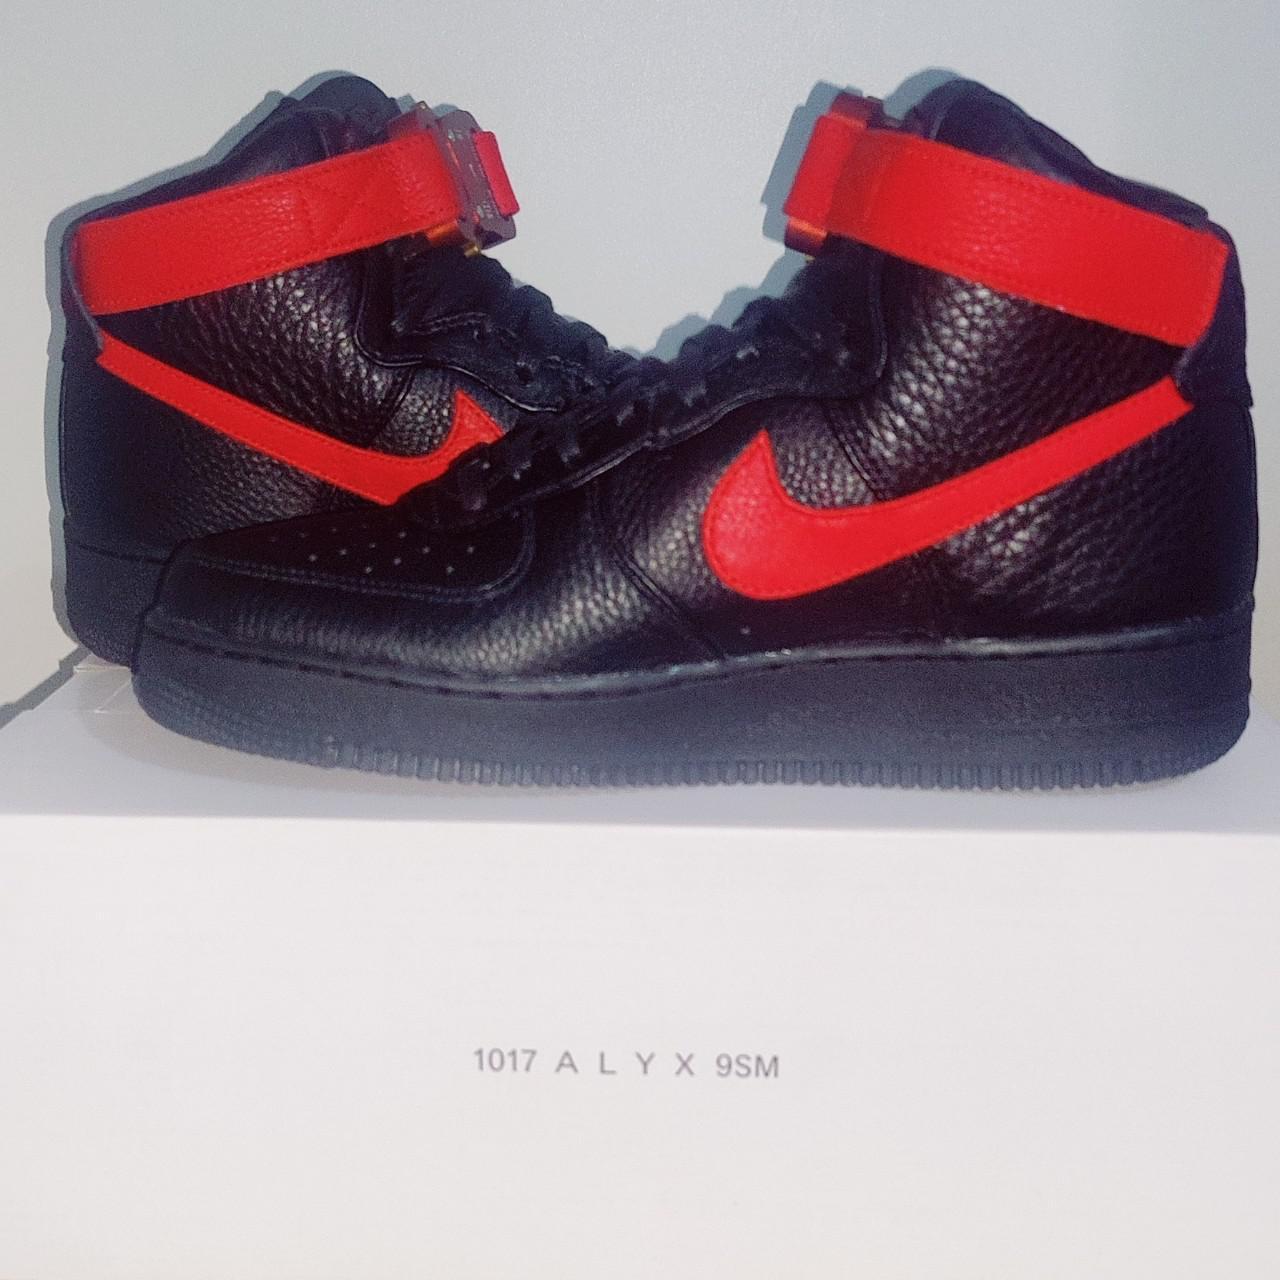 Alyx x Nike Air Force 1 High University Red Black Release Date - SBD